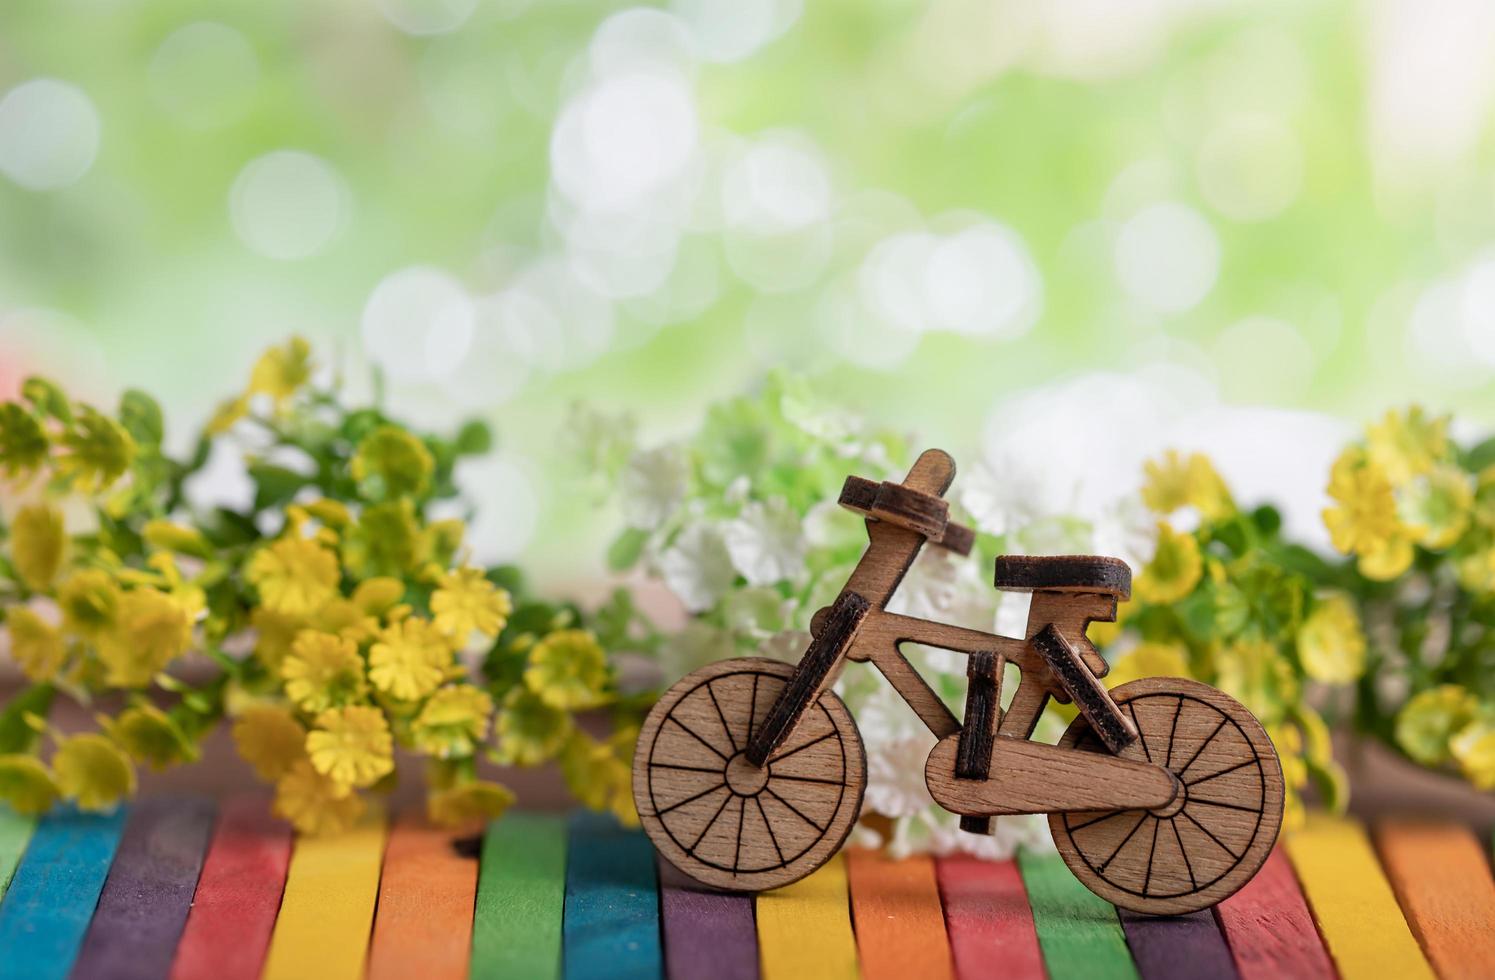 Bicycle wood model place on the colorful wooden photo